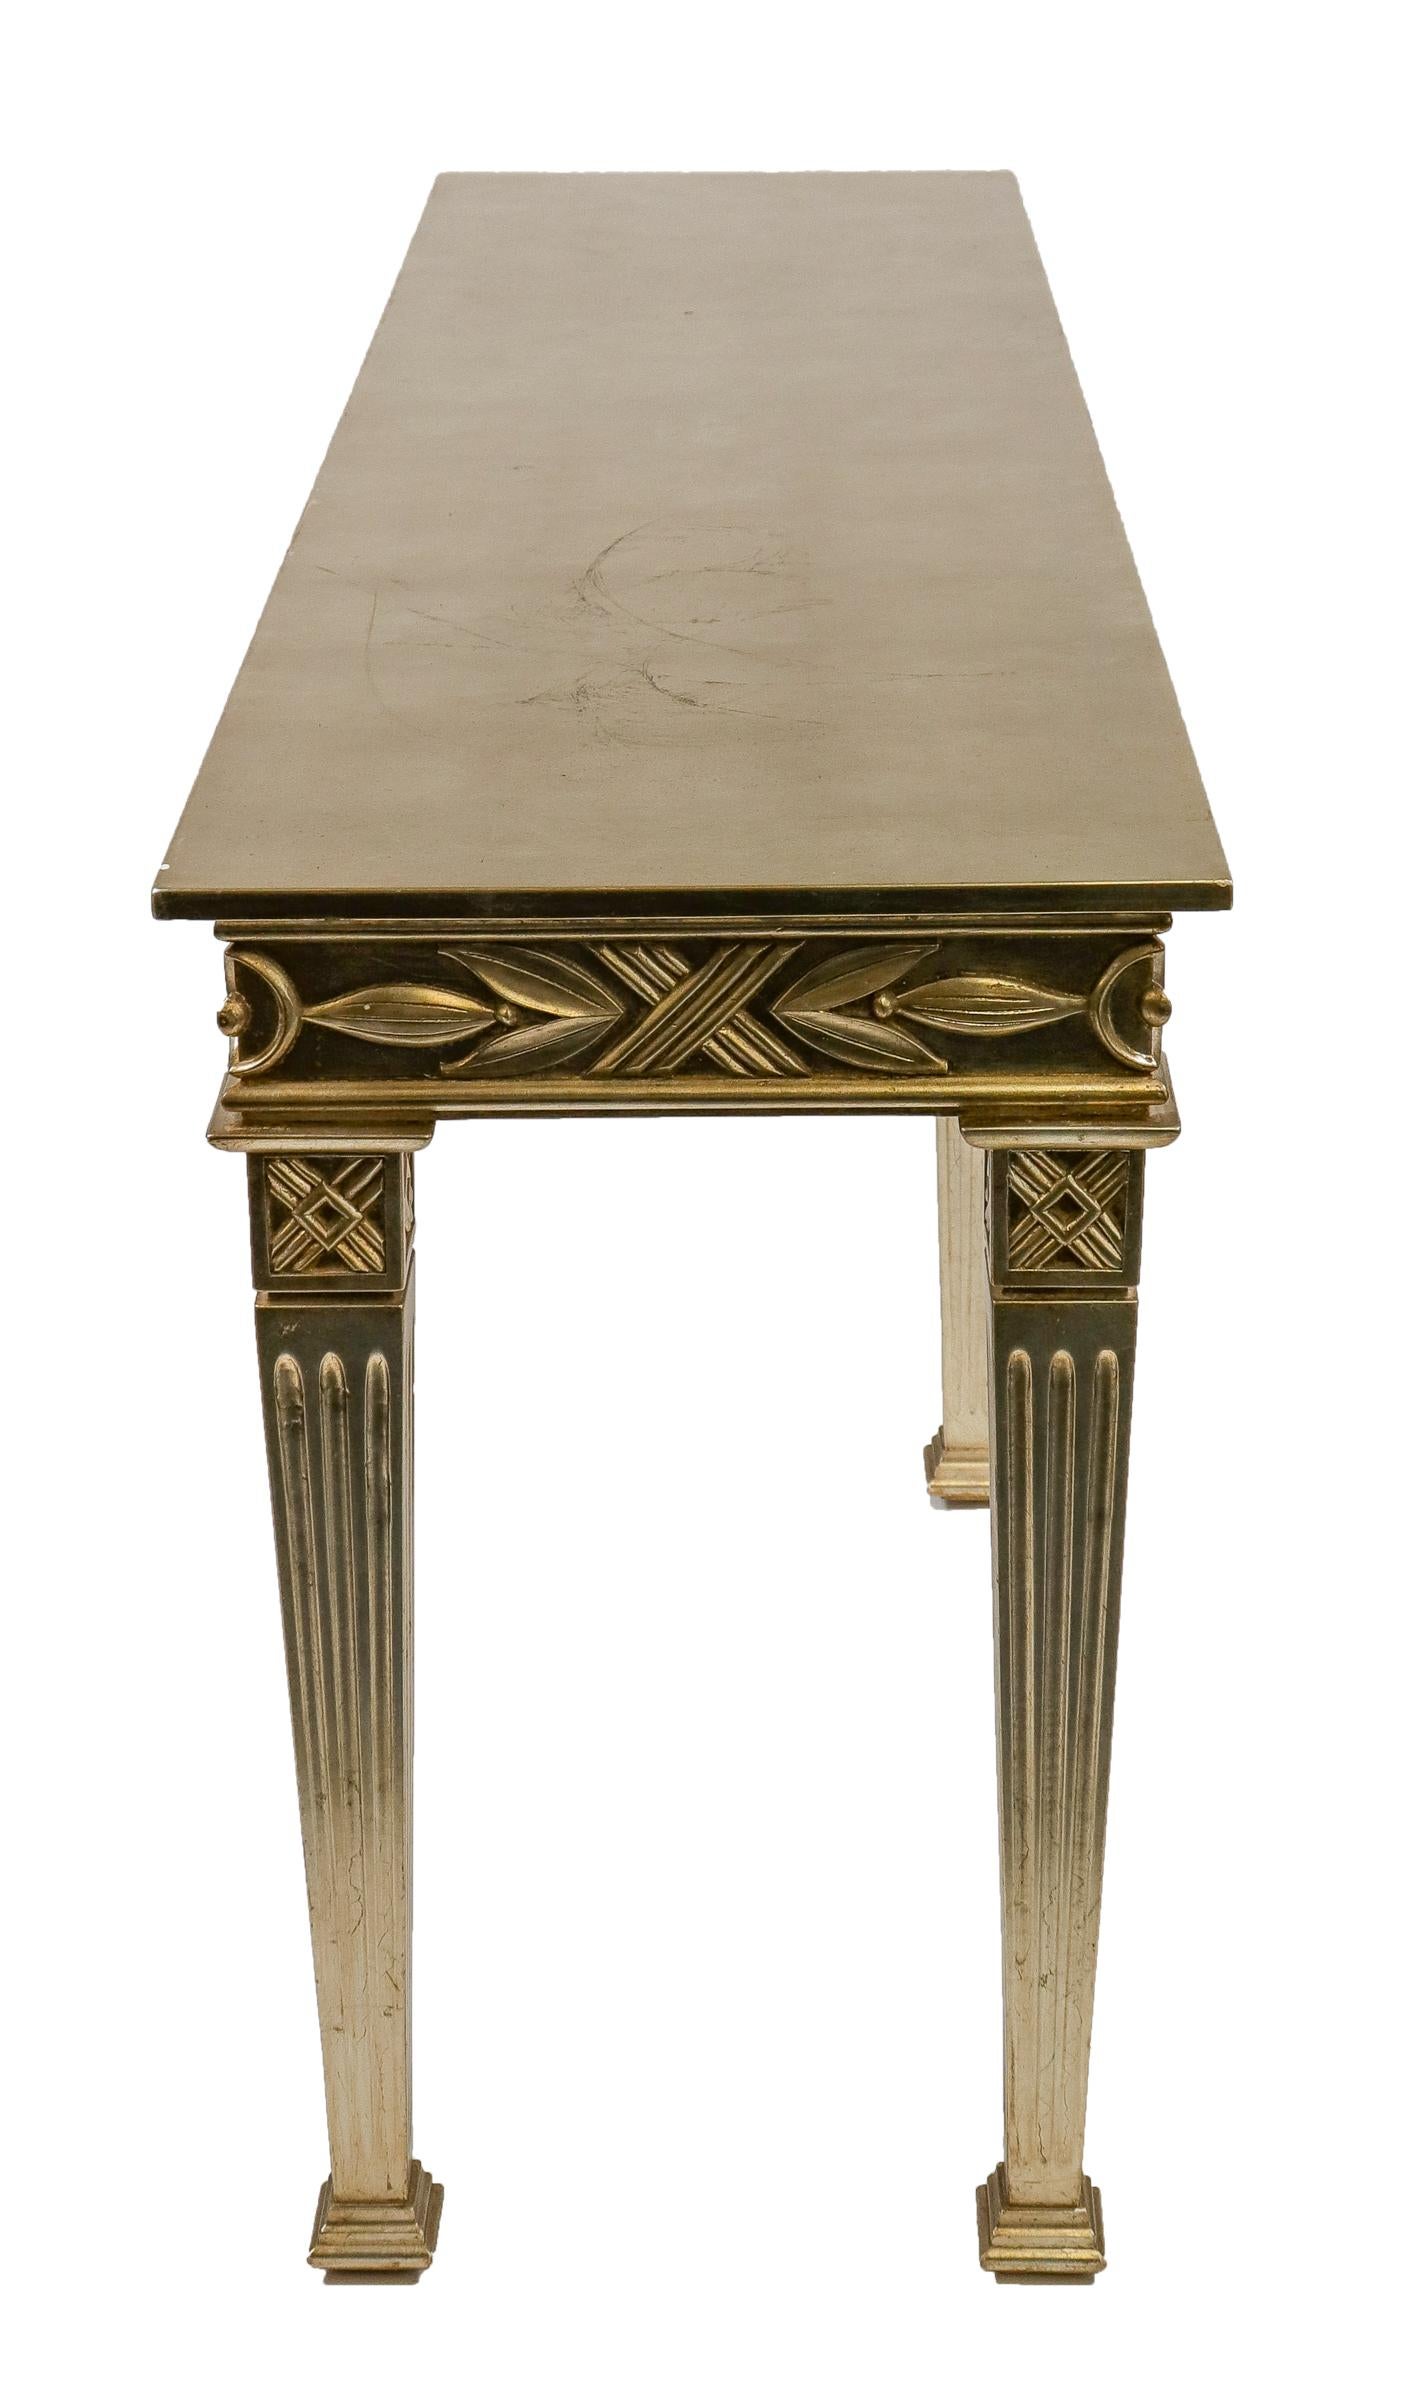 20th Century Italian Neoclassical Manner Silver-Gilt Console Table